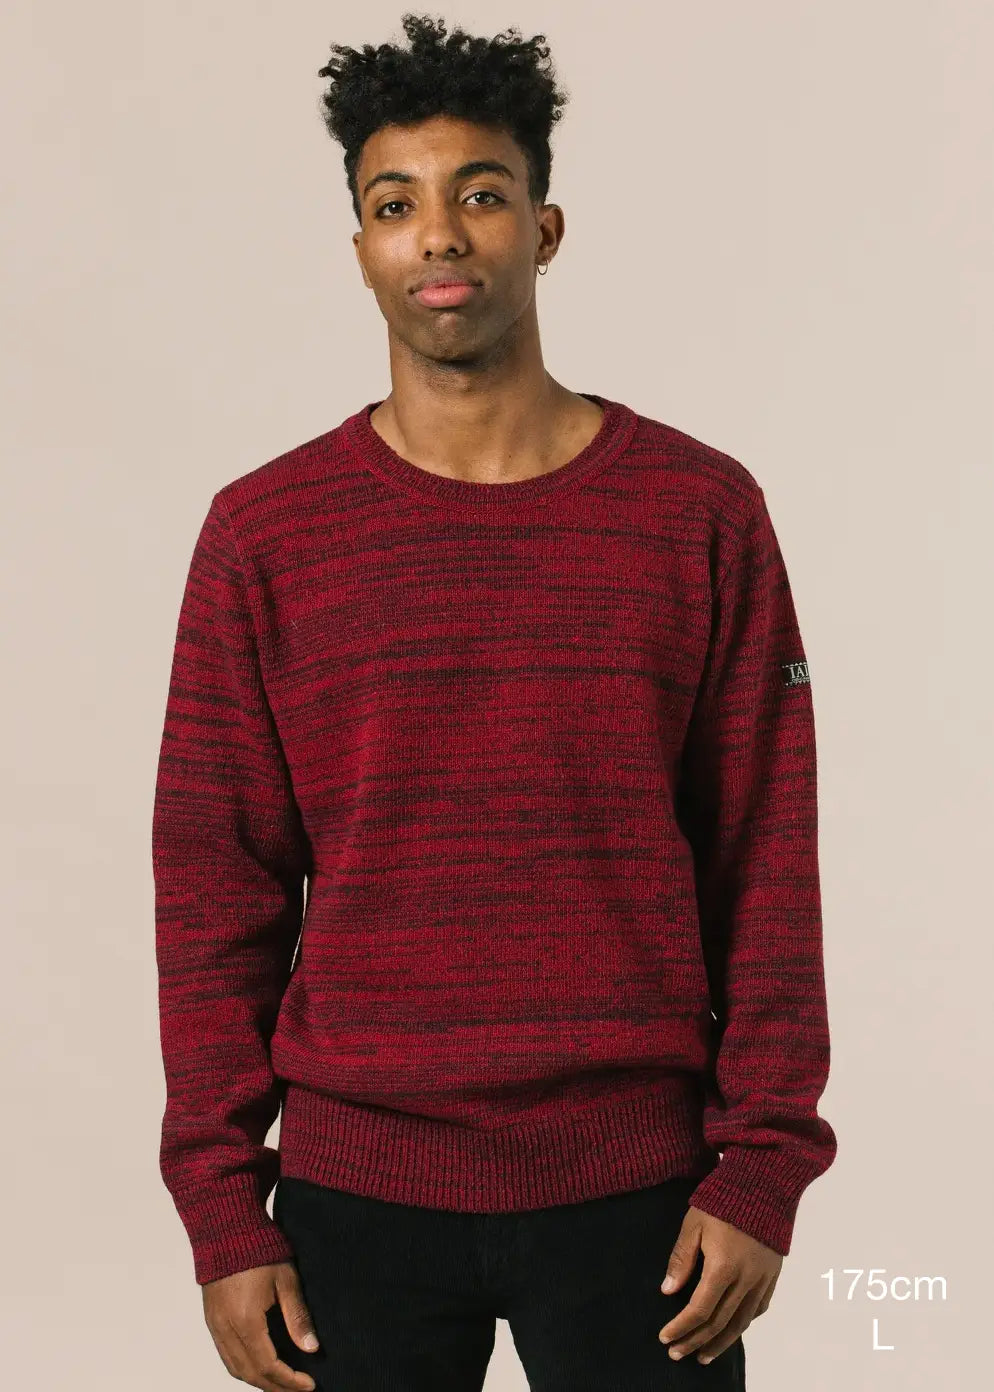 Half-length photograph detailing the height of the model (175cm) and the size of the sweater (L). 